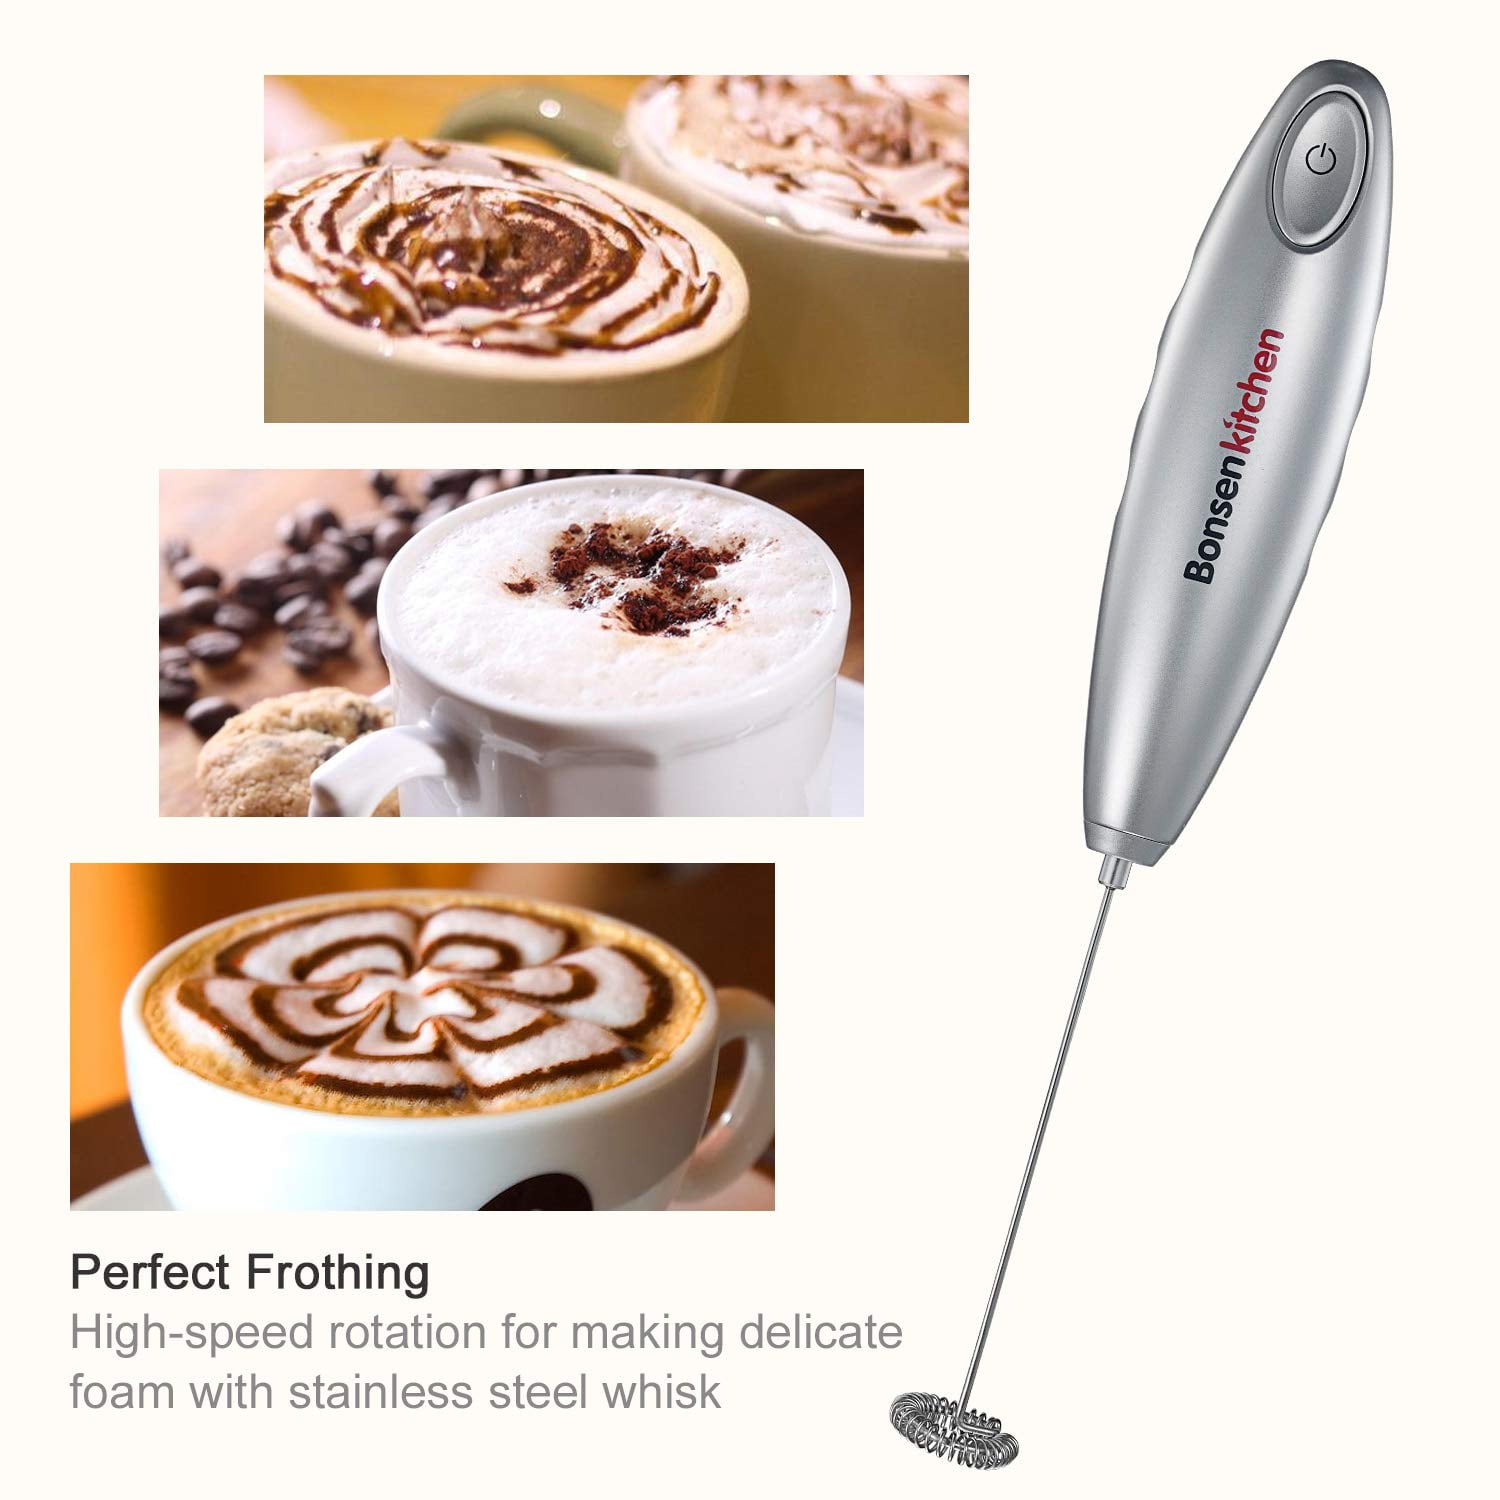  Bean Envy Milk Frother for Coffee - Handheld, Mini Electric  Drink Mixer, Foamer & Frother with Stand for Coffee, Lattes, Hot Chocolates  and Shakes - Pink: Home & Kitchen